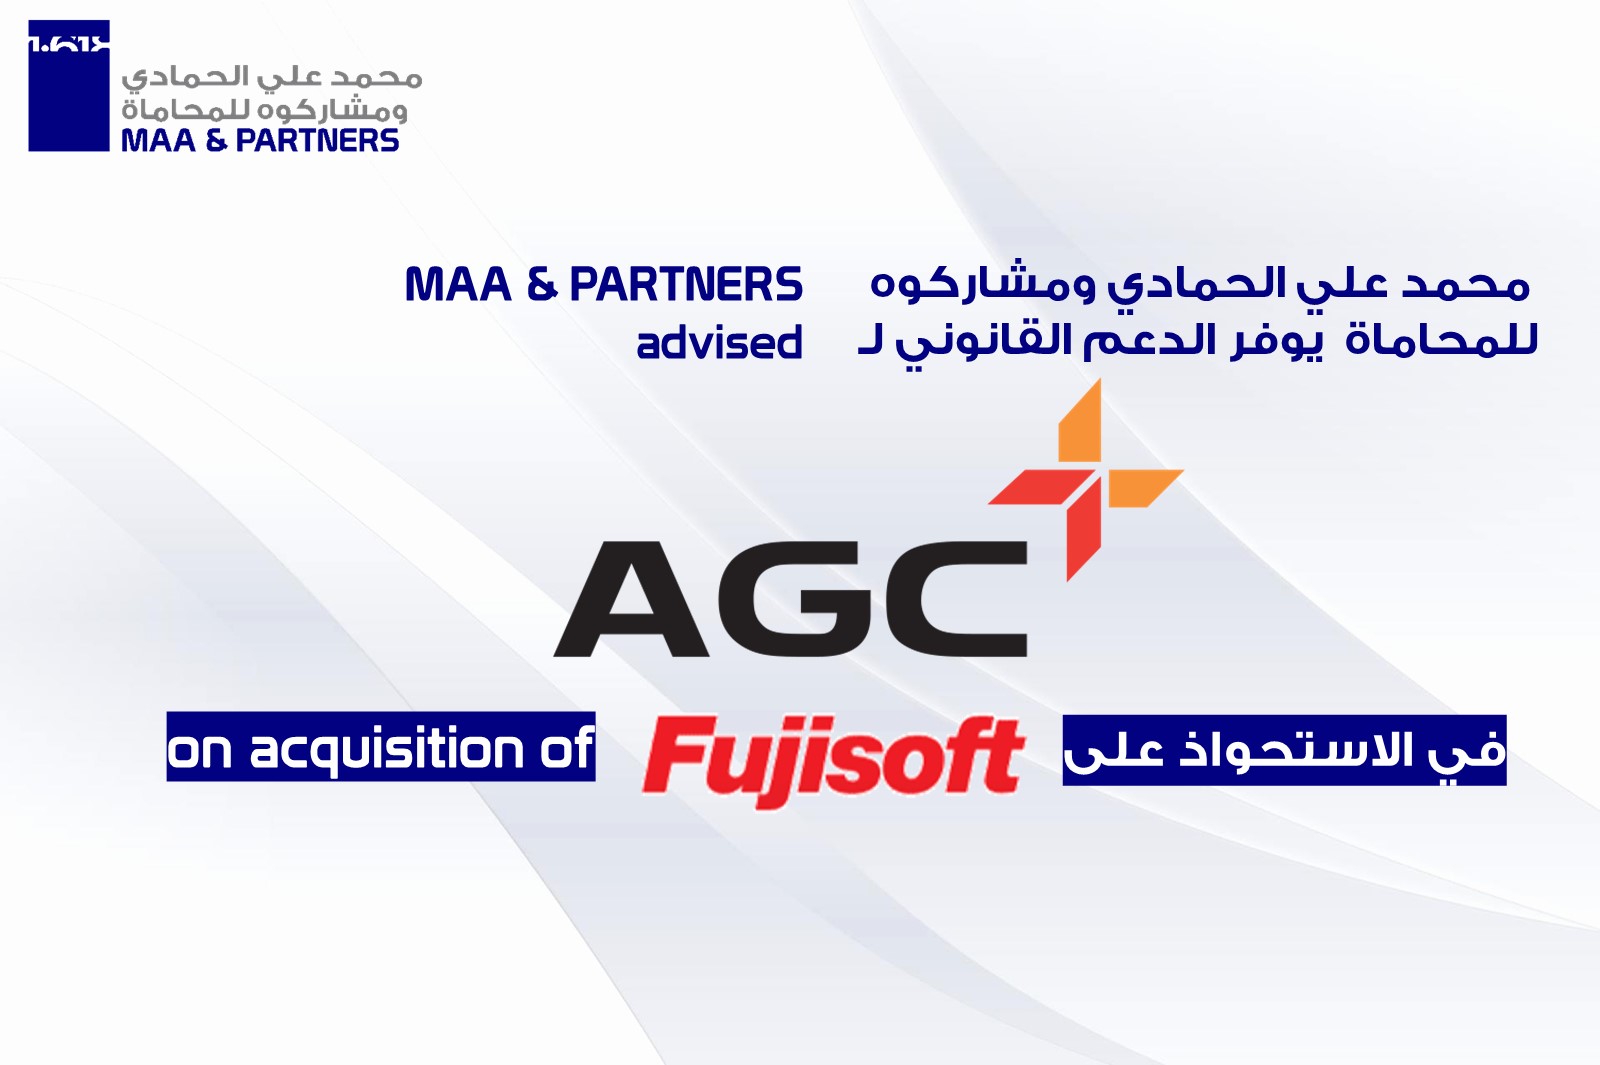 MAA & PARTNERS advised AGC Networks on acquisition of Fujisoft Technology